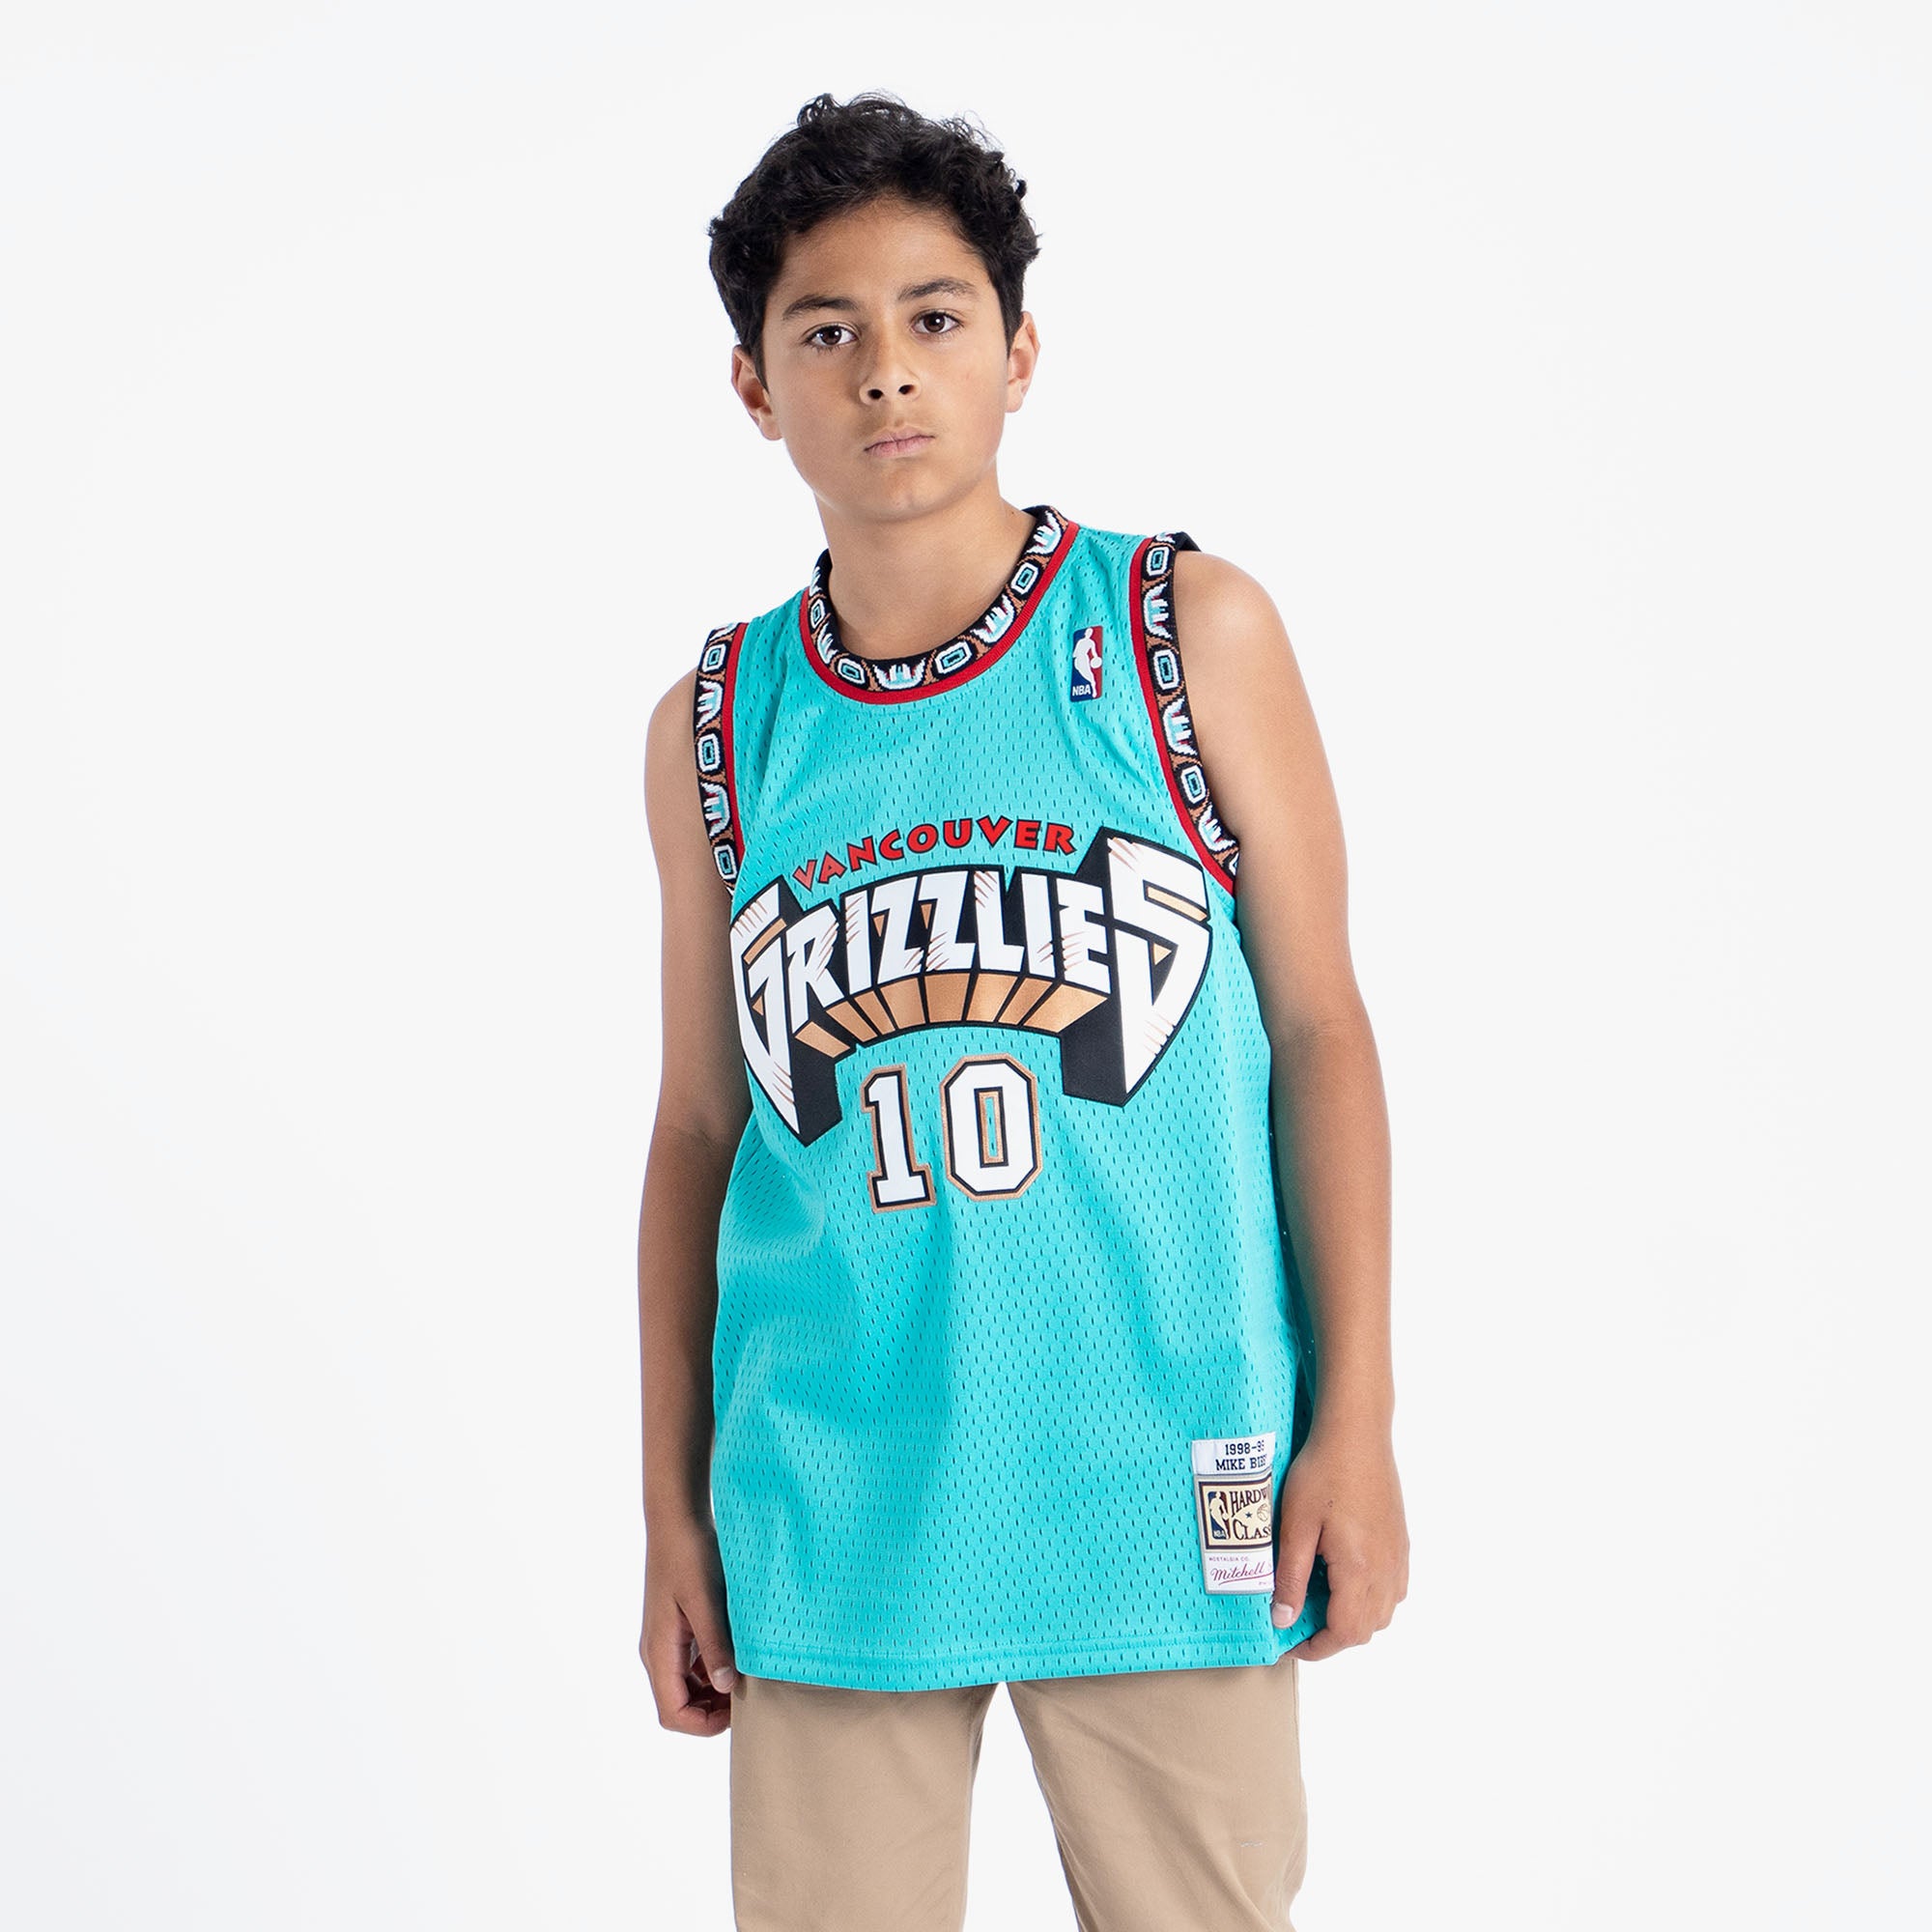 Mitchell & Ness Swingman Jersey Vancouver Grizzlies Road 1998-99 Mike Bibby S